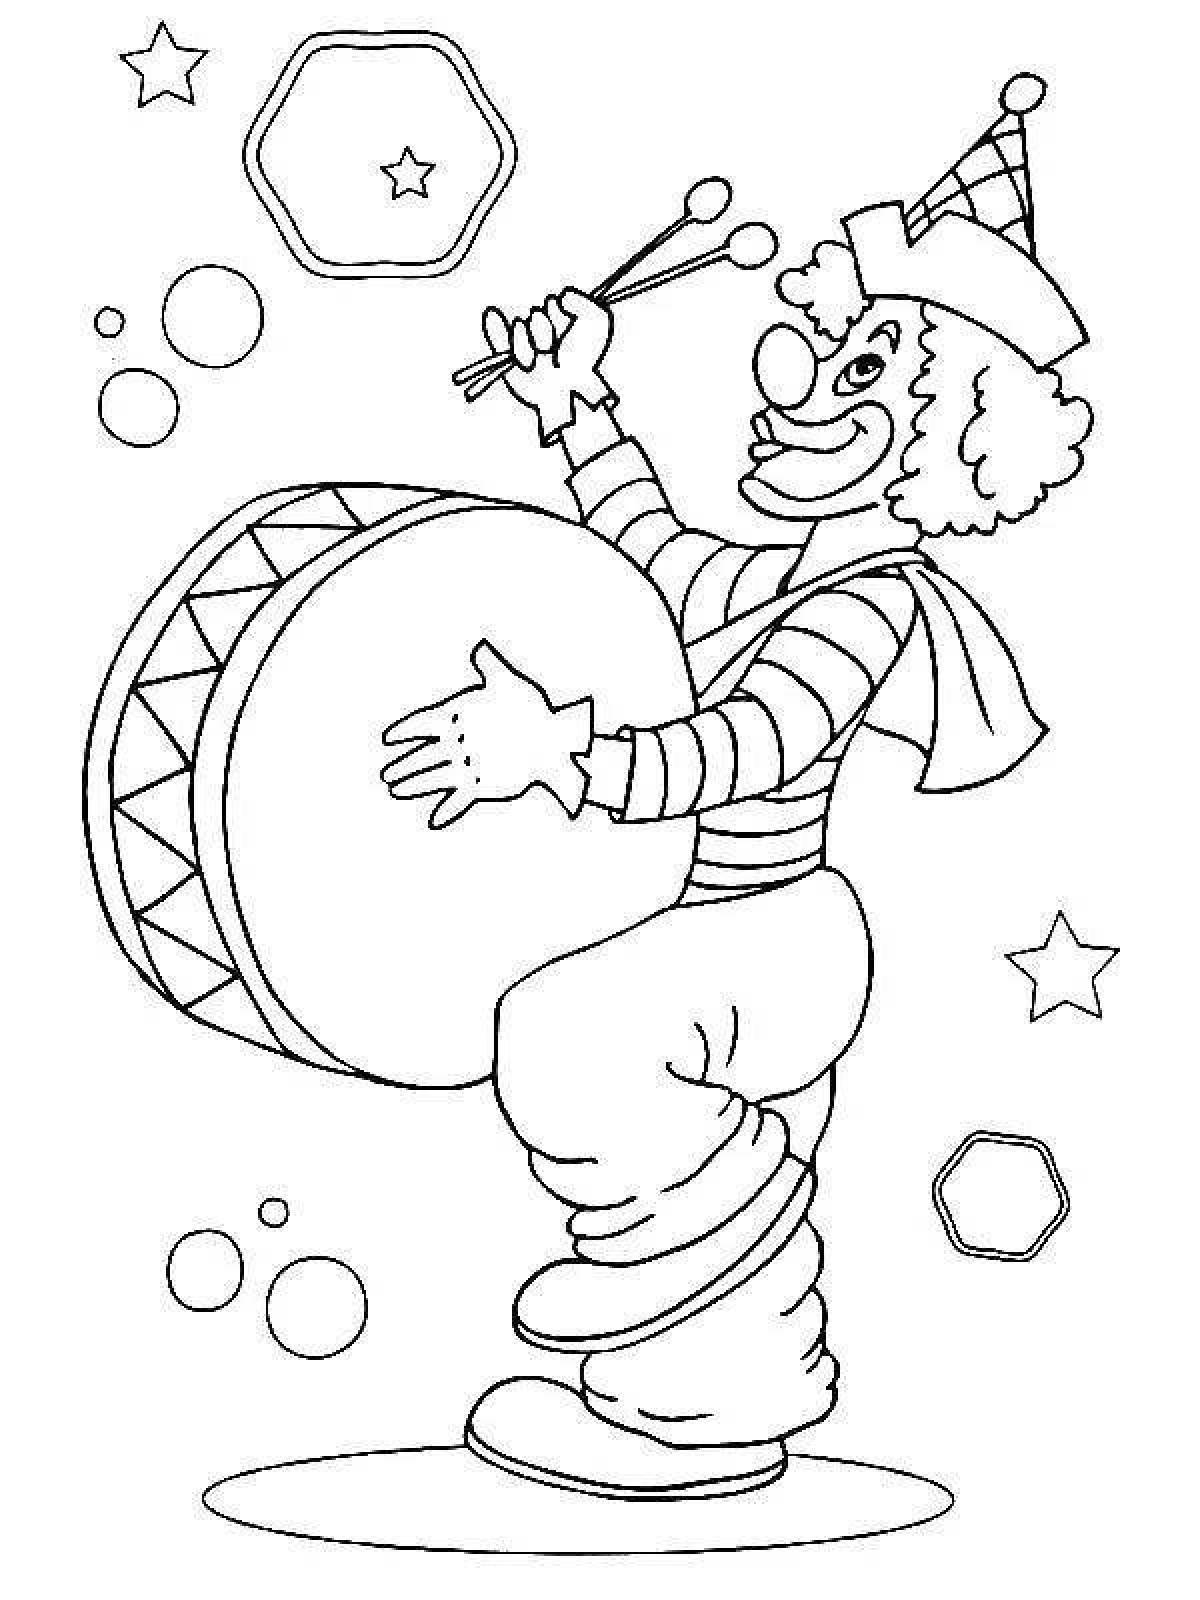 Fun circus coloring book for 6-7 year olds